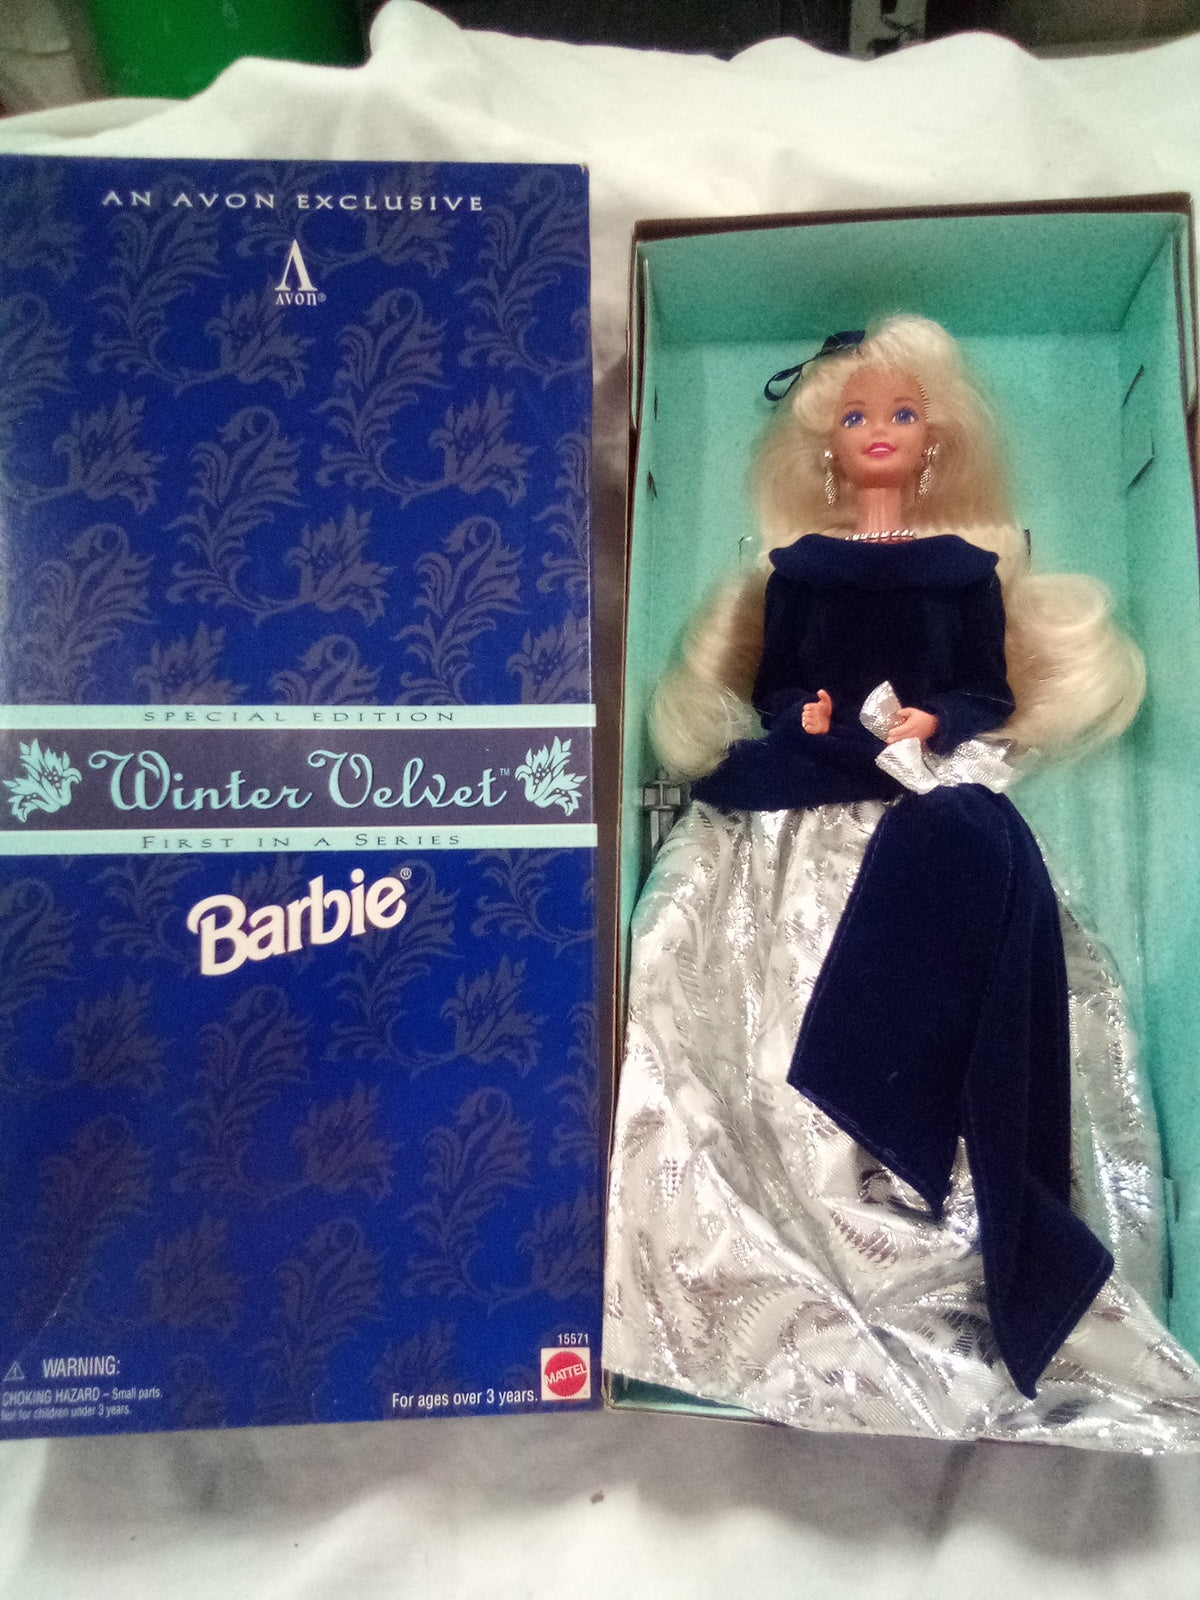 BARBIE Special edition "Winter Velvet Barbie";  first in a series